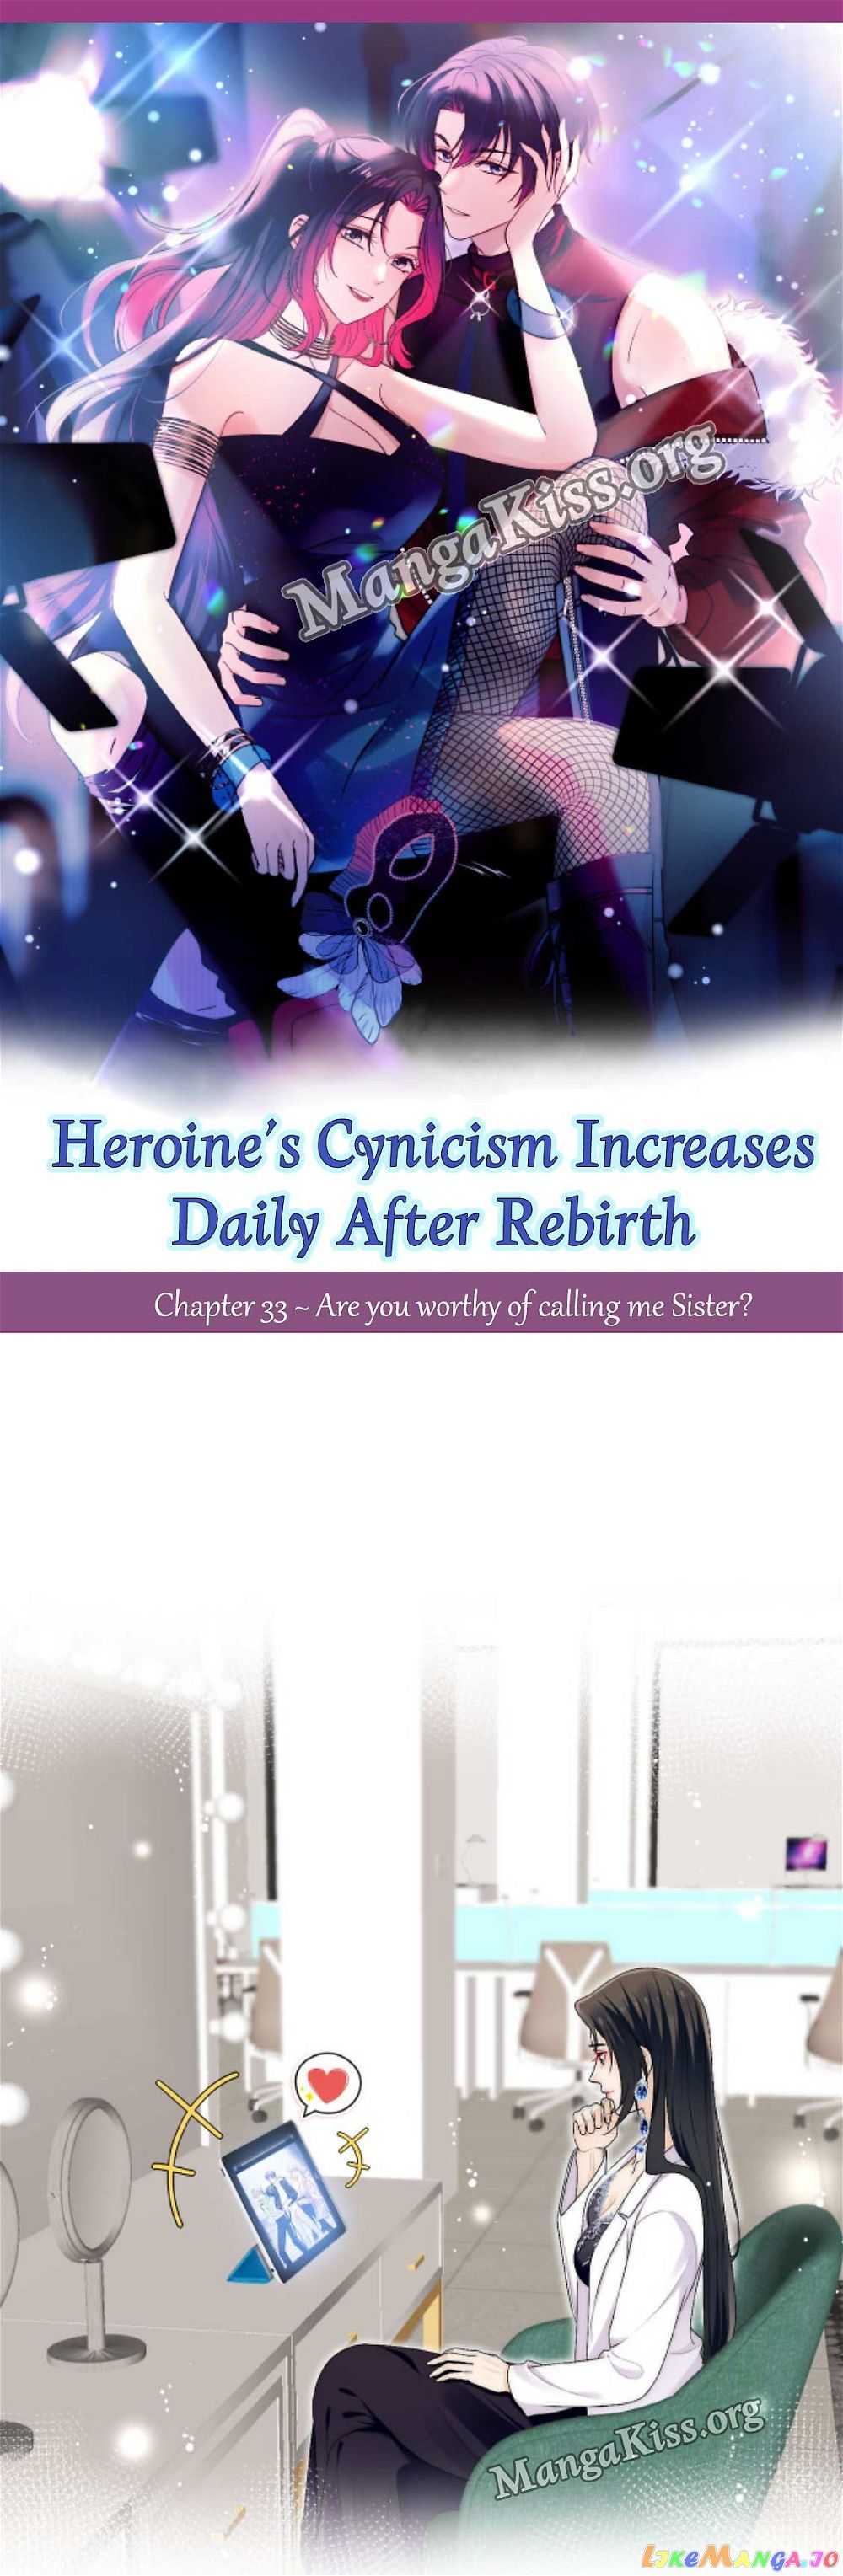 Heroine’S Cynicism Increases Daily After Rebirth - Page 2